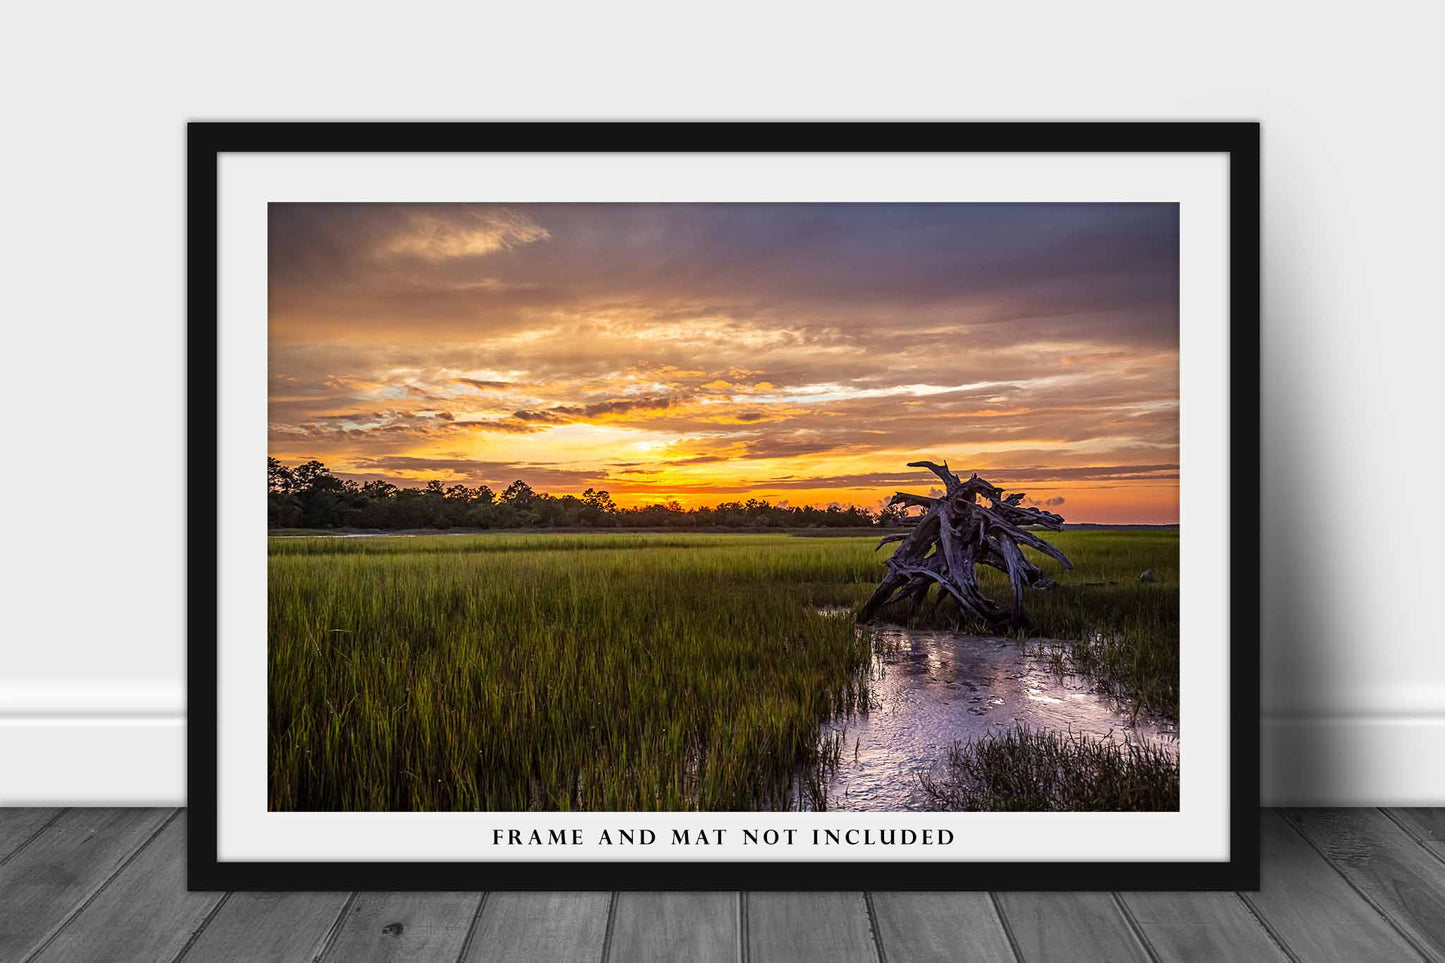 Lowcountry Photography Print - Wall Art Picture of Dead Tree in Salt Marsh at Sunset in Pinckney Island South Carolina Landscape Decor